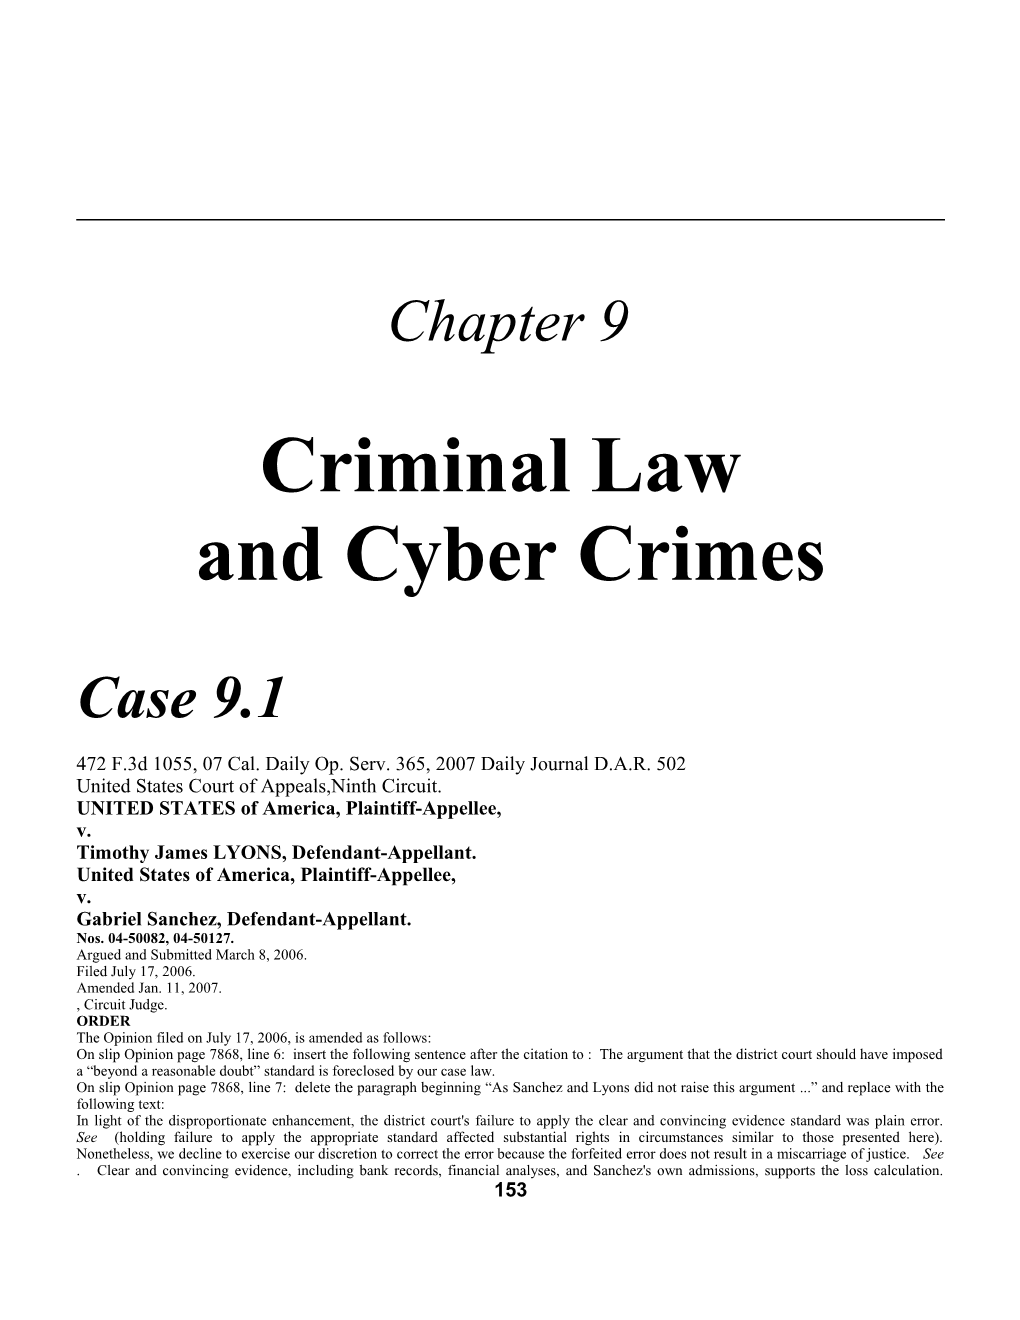 Chapter 9: Criminal Law and Cyber Crimes 1